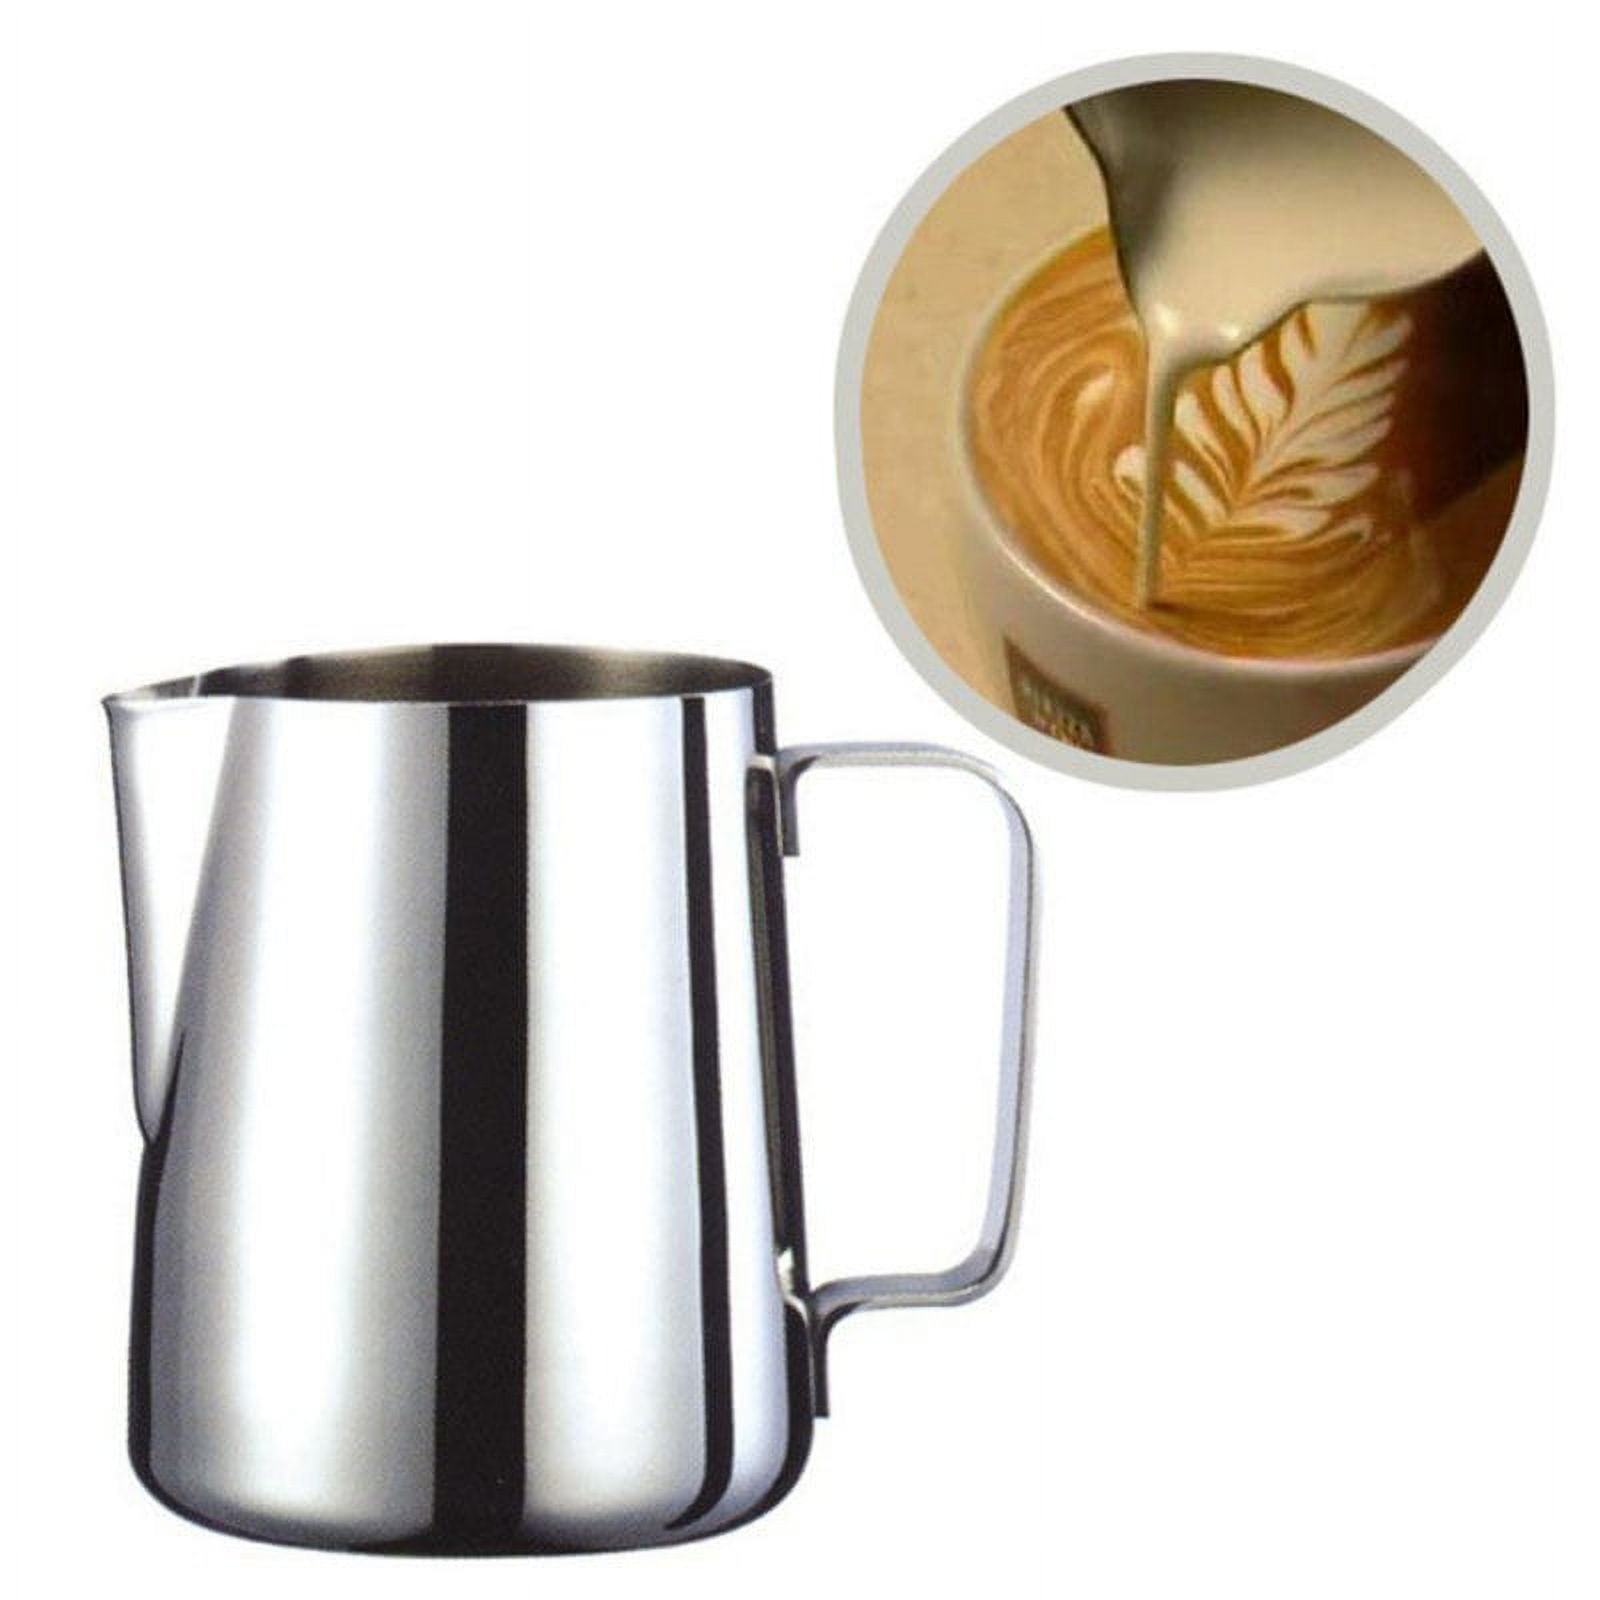 Dropship 150ml Stainless Steel Milk Frothing Pitcher Espresso